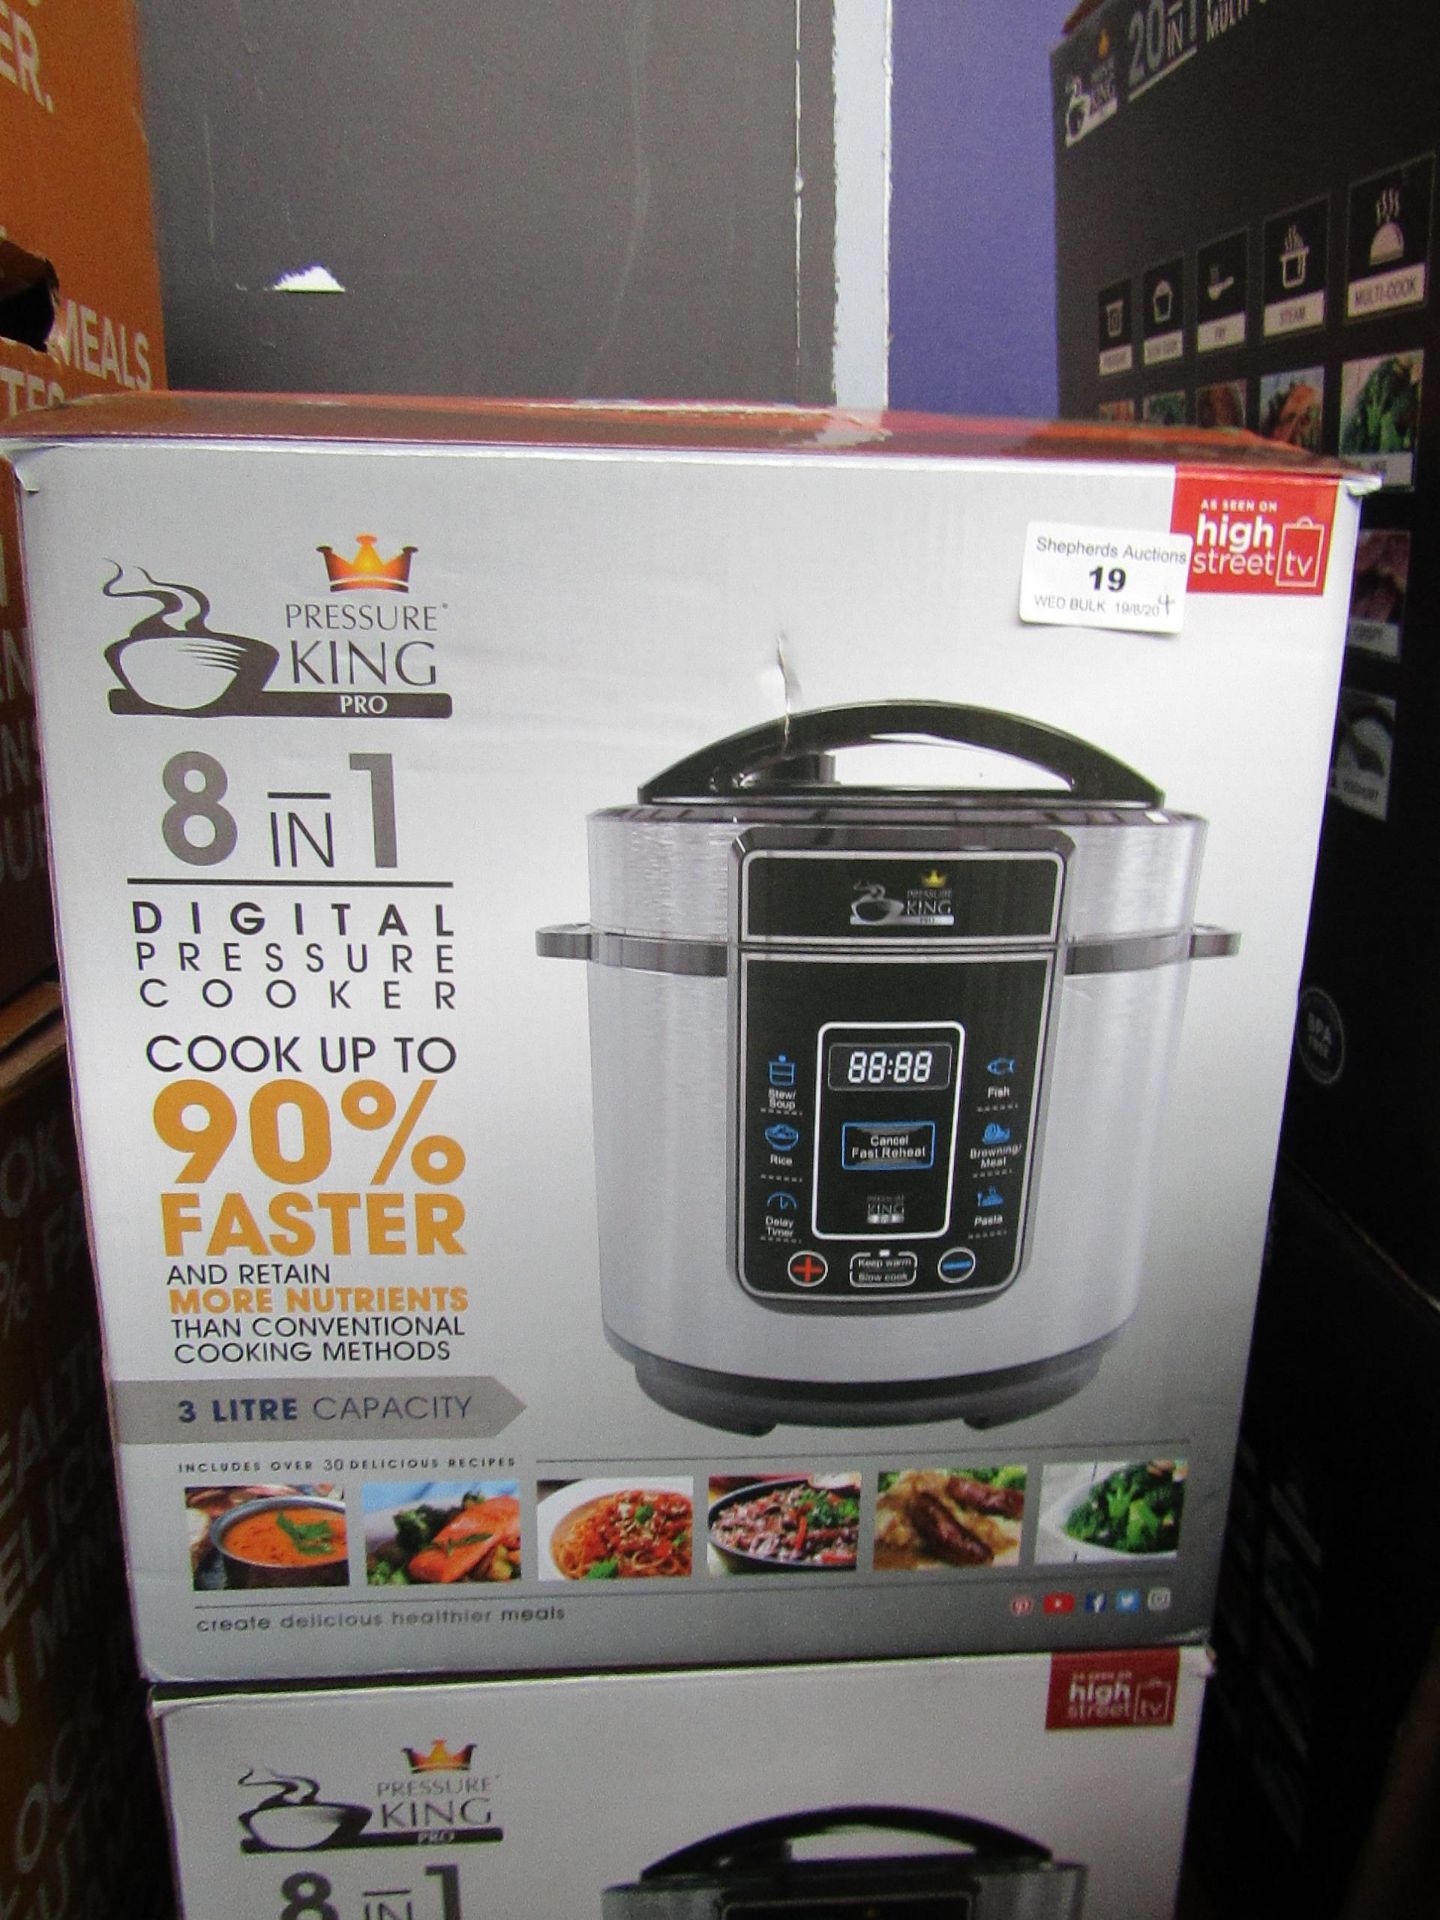 | 4X | PRESSURE KING PRO 8 IN 1 3L DIGITAL PRESSURE COOKER UNTESTED AND BOXED | NO ONLINE RE-